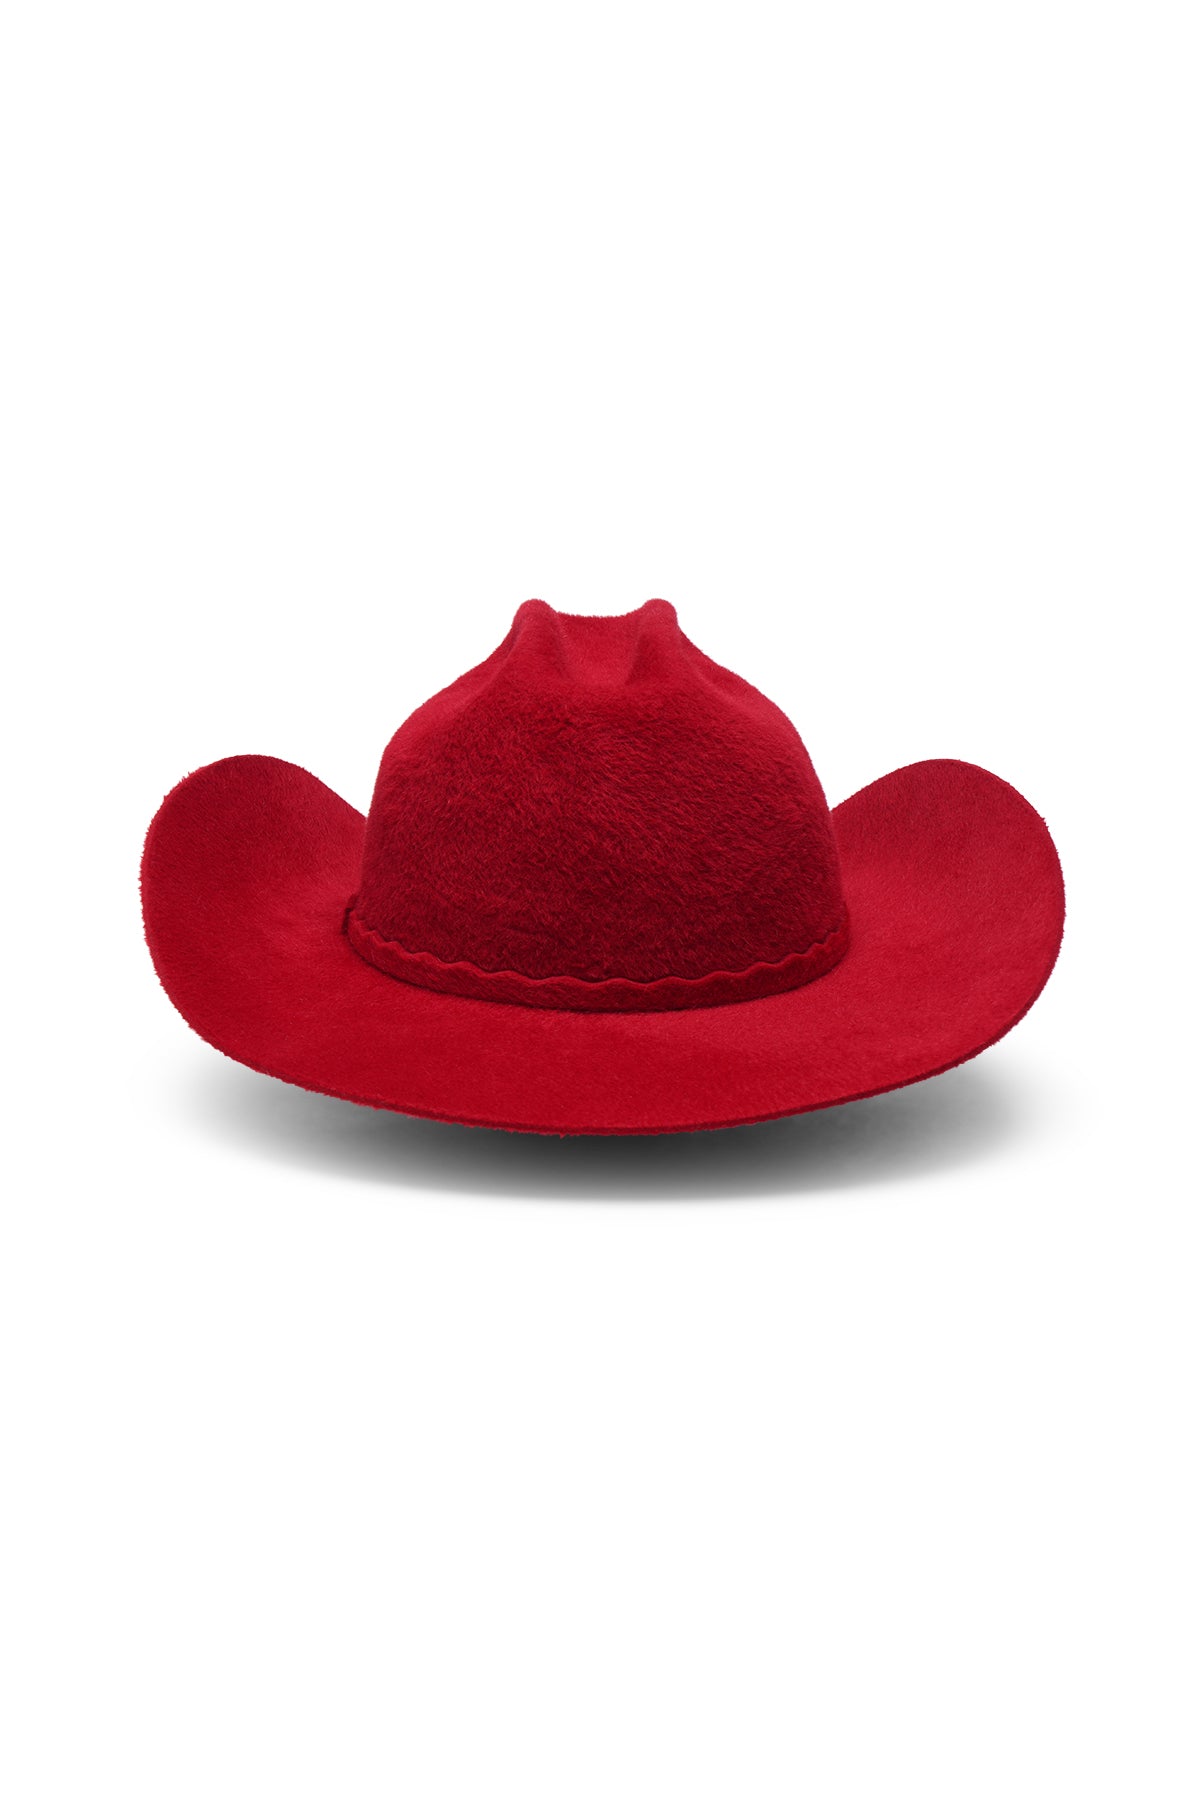 Unisex red fur felt cowboy hat with a wide brim, self-fabric band, silver. stud detail and center crease, handcrafted by SoonNoon in Stockholm